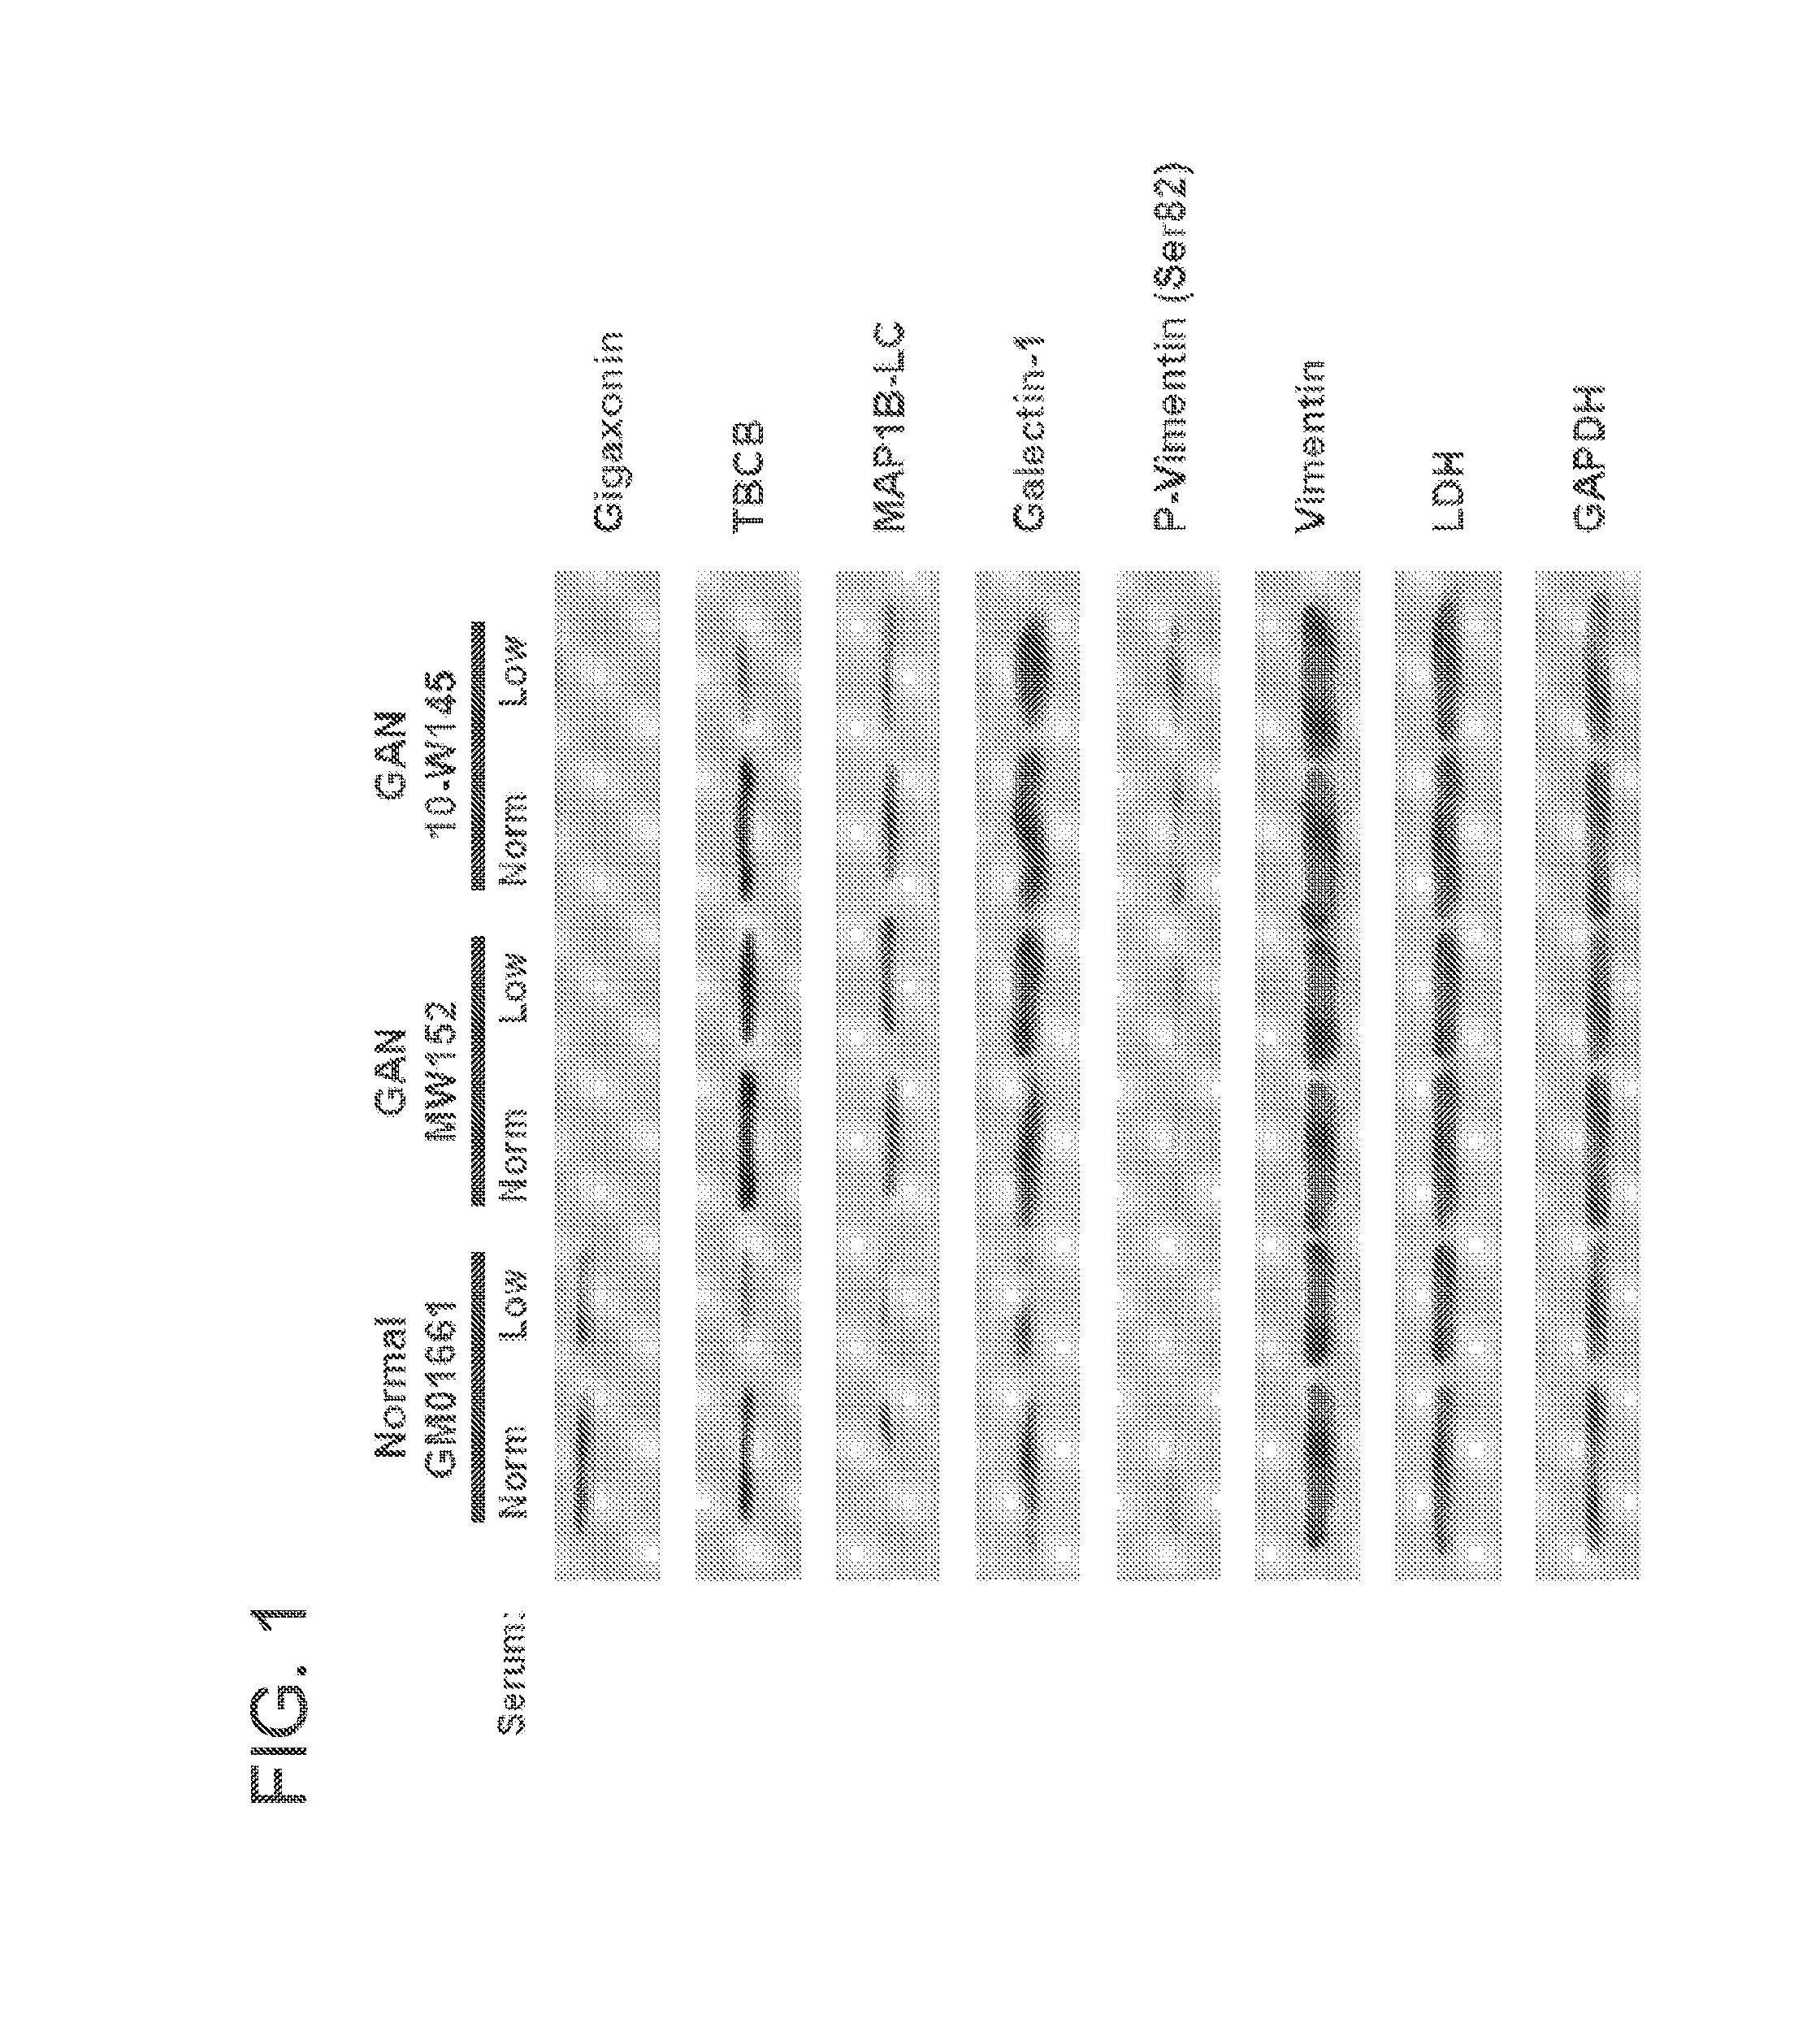 Gigaxonin fusion protein and methods for treating giant axonal neuropathy